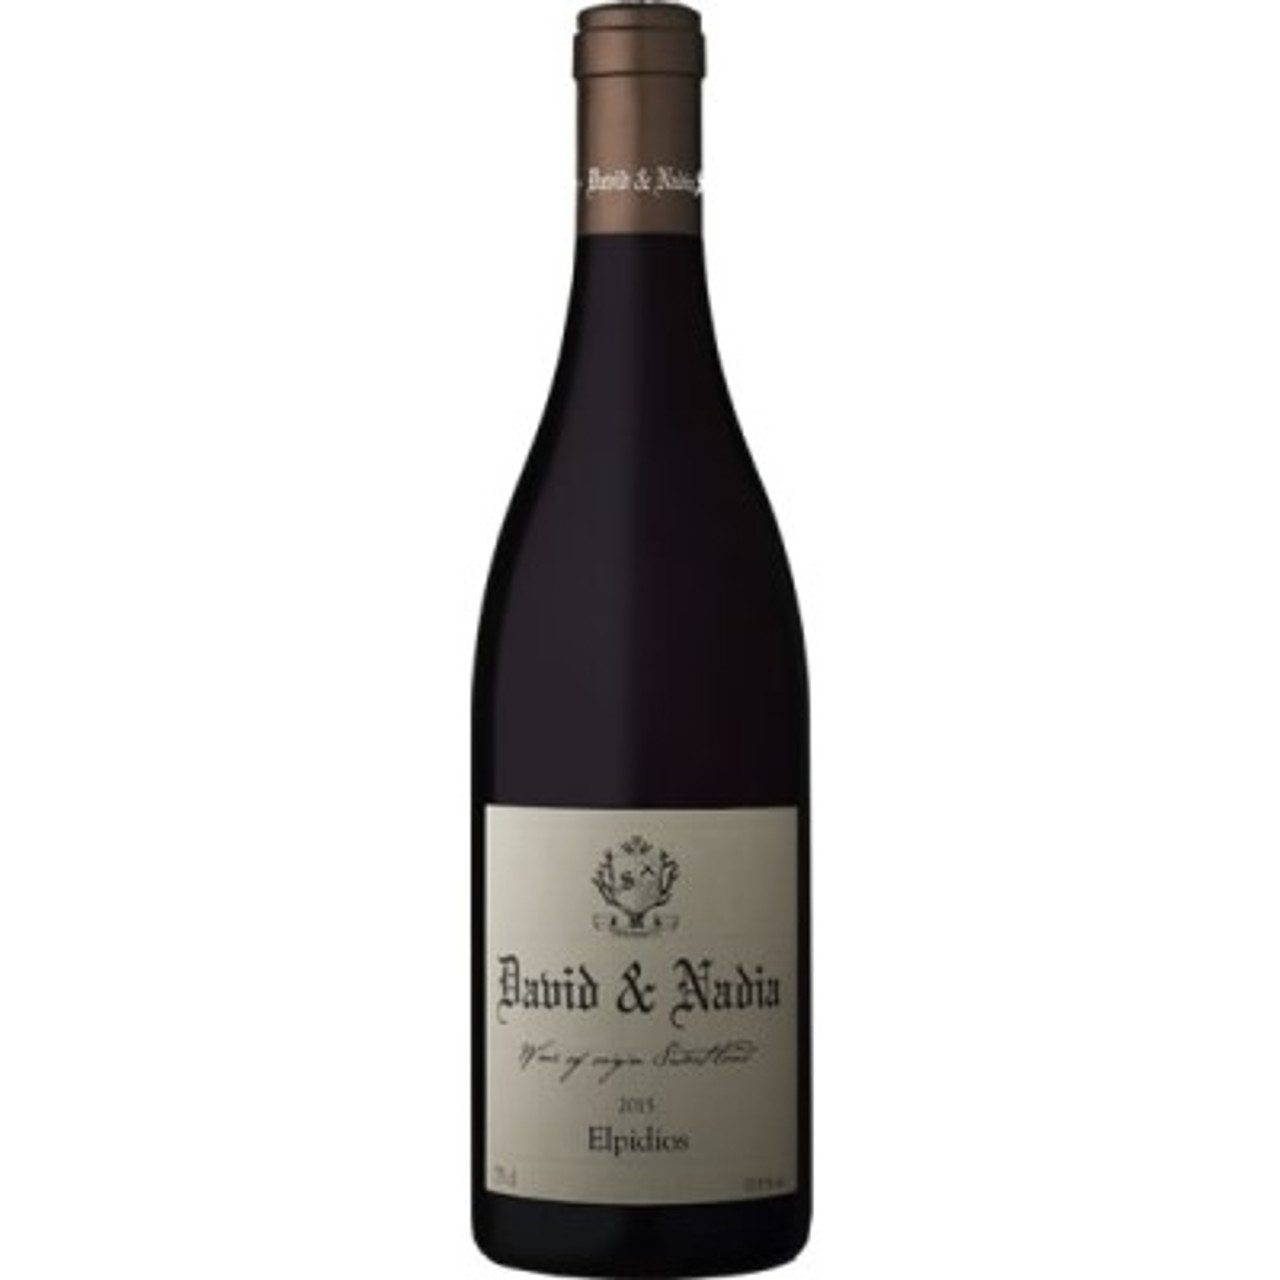 South African Red Wine